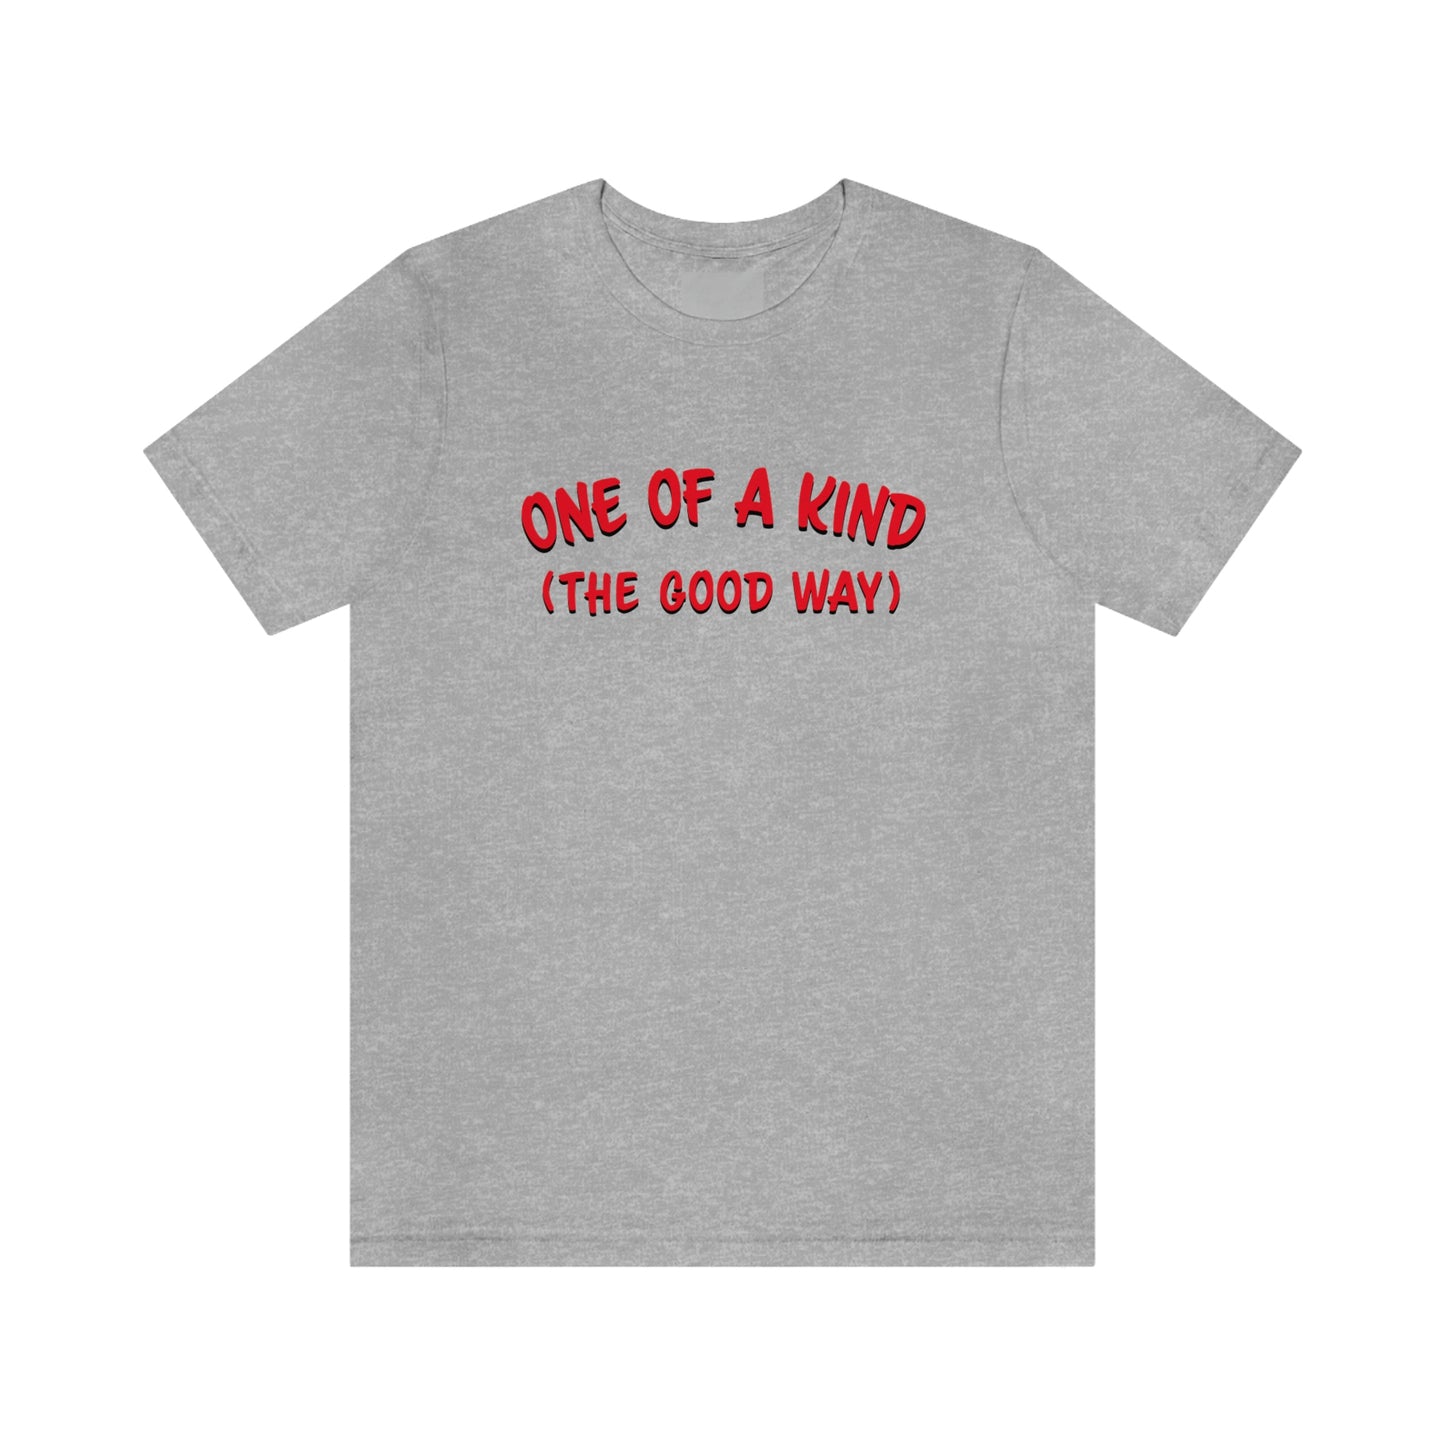 One of a Kind - Unisex T-Shirt